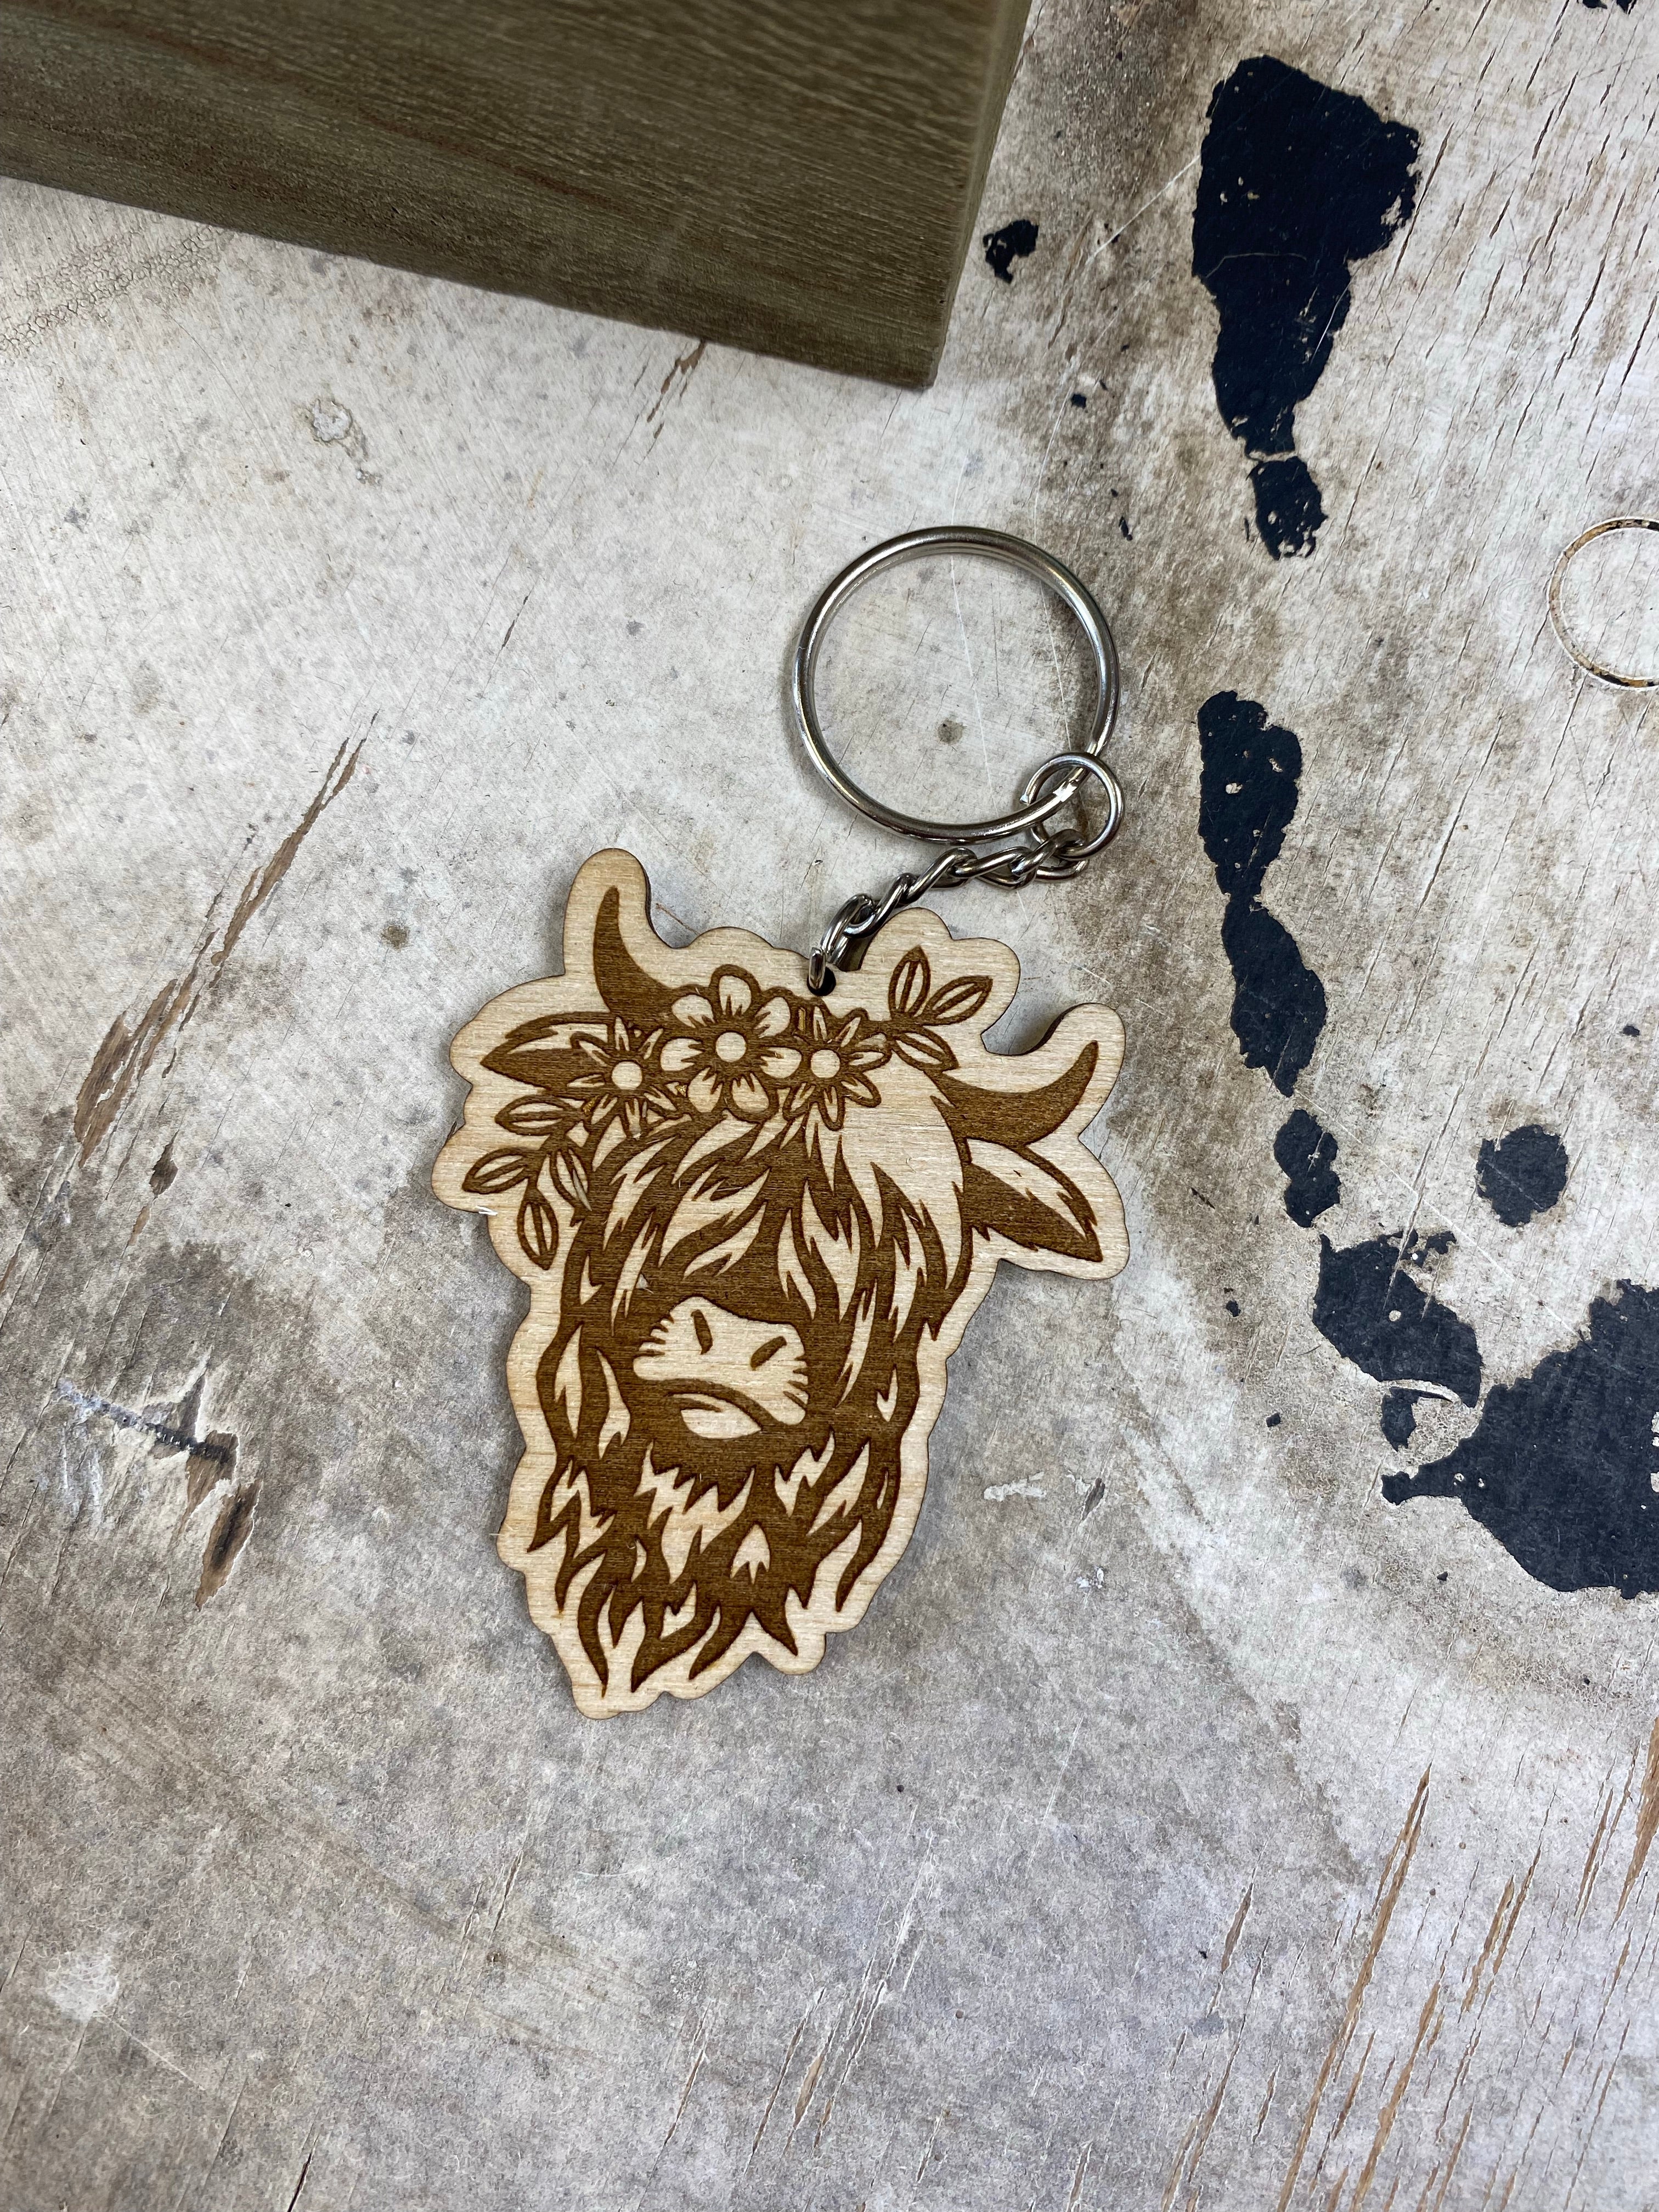 Obsessing over these cow keychains 🐮🤠 #cow #highlandcow #keychain #d